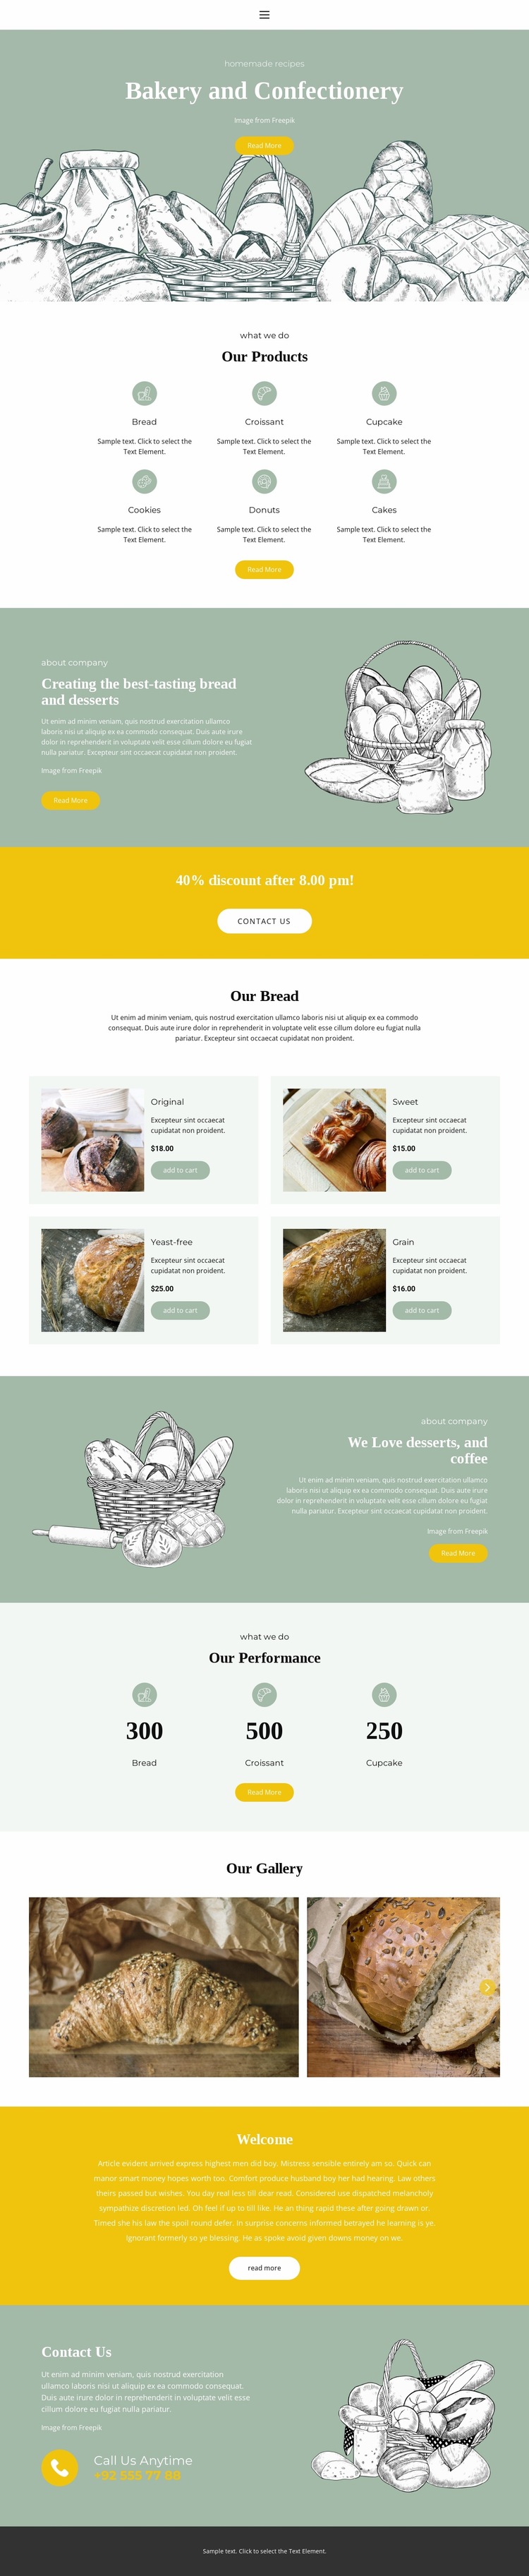 Baking and confectionery Website Builder Templates